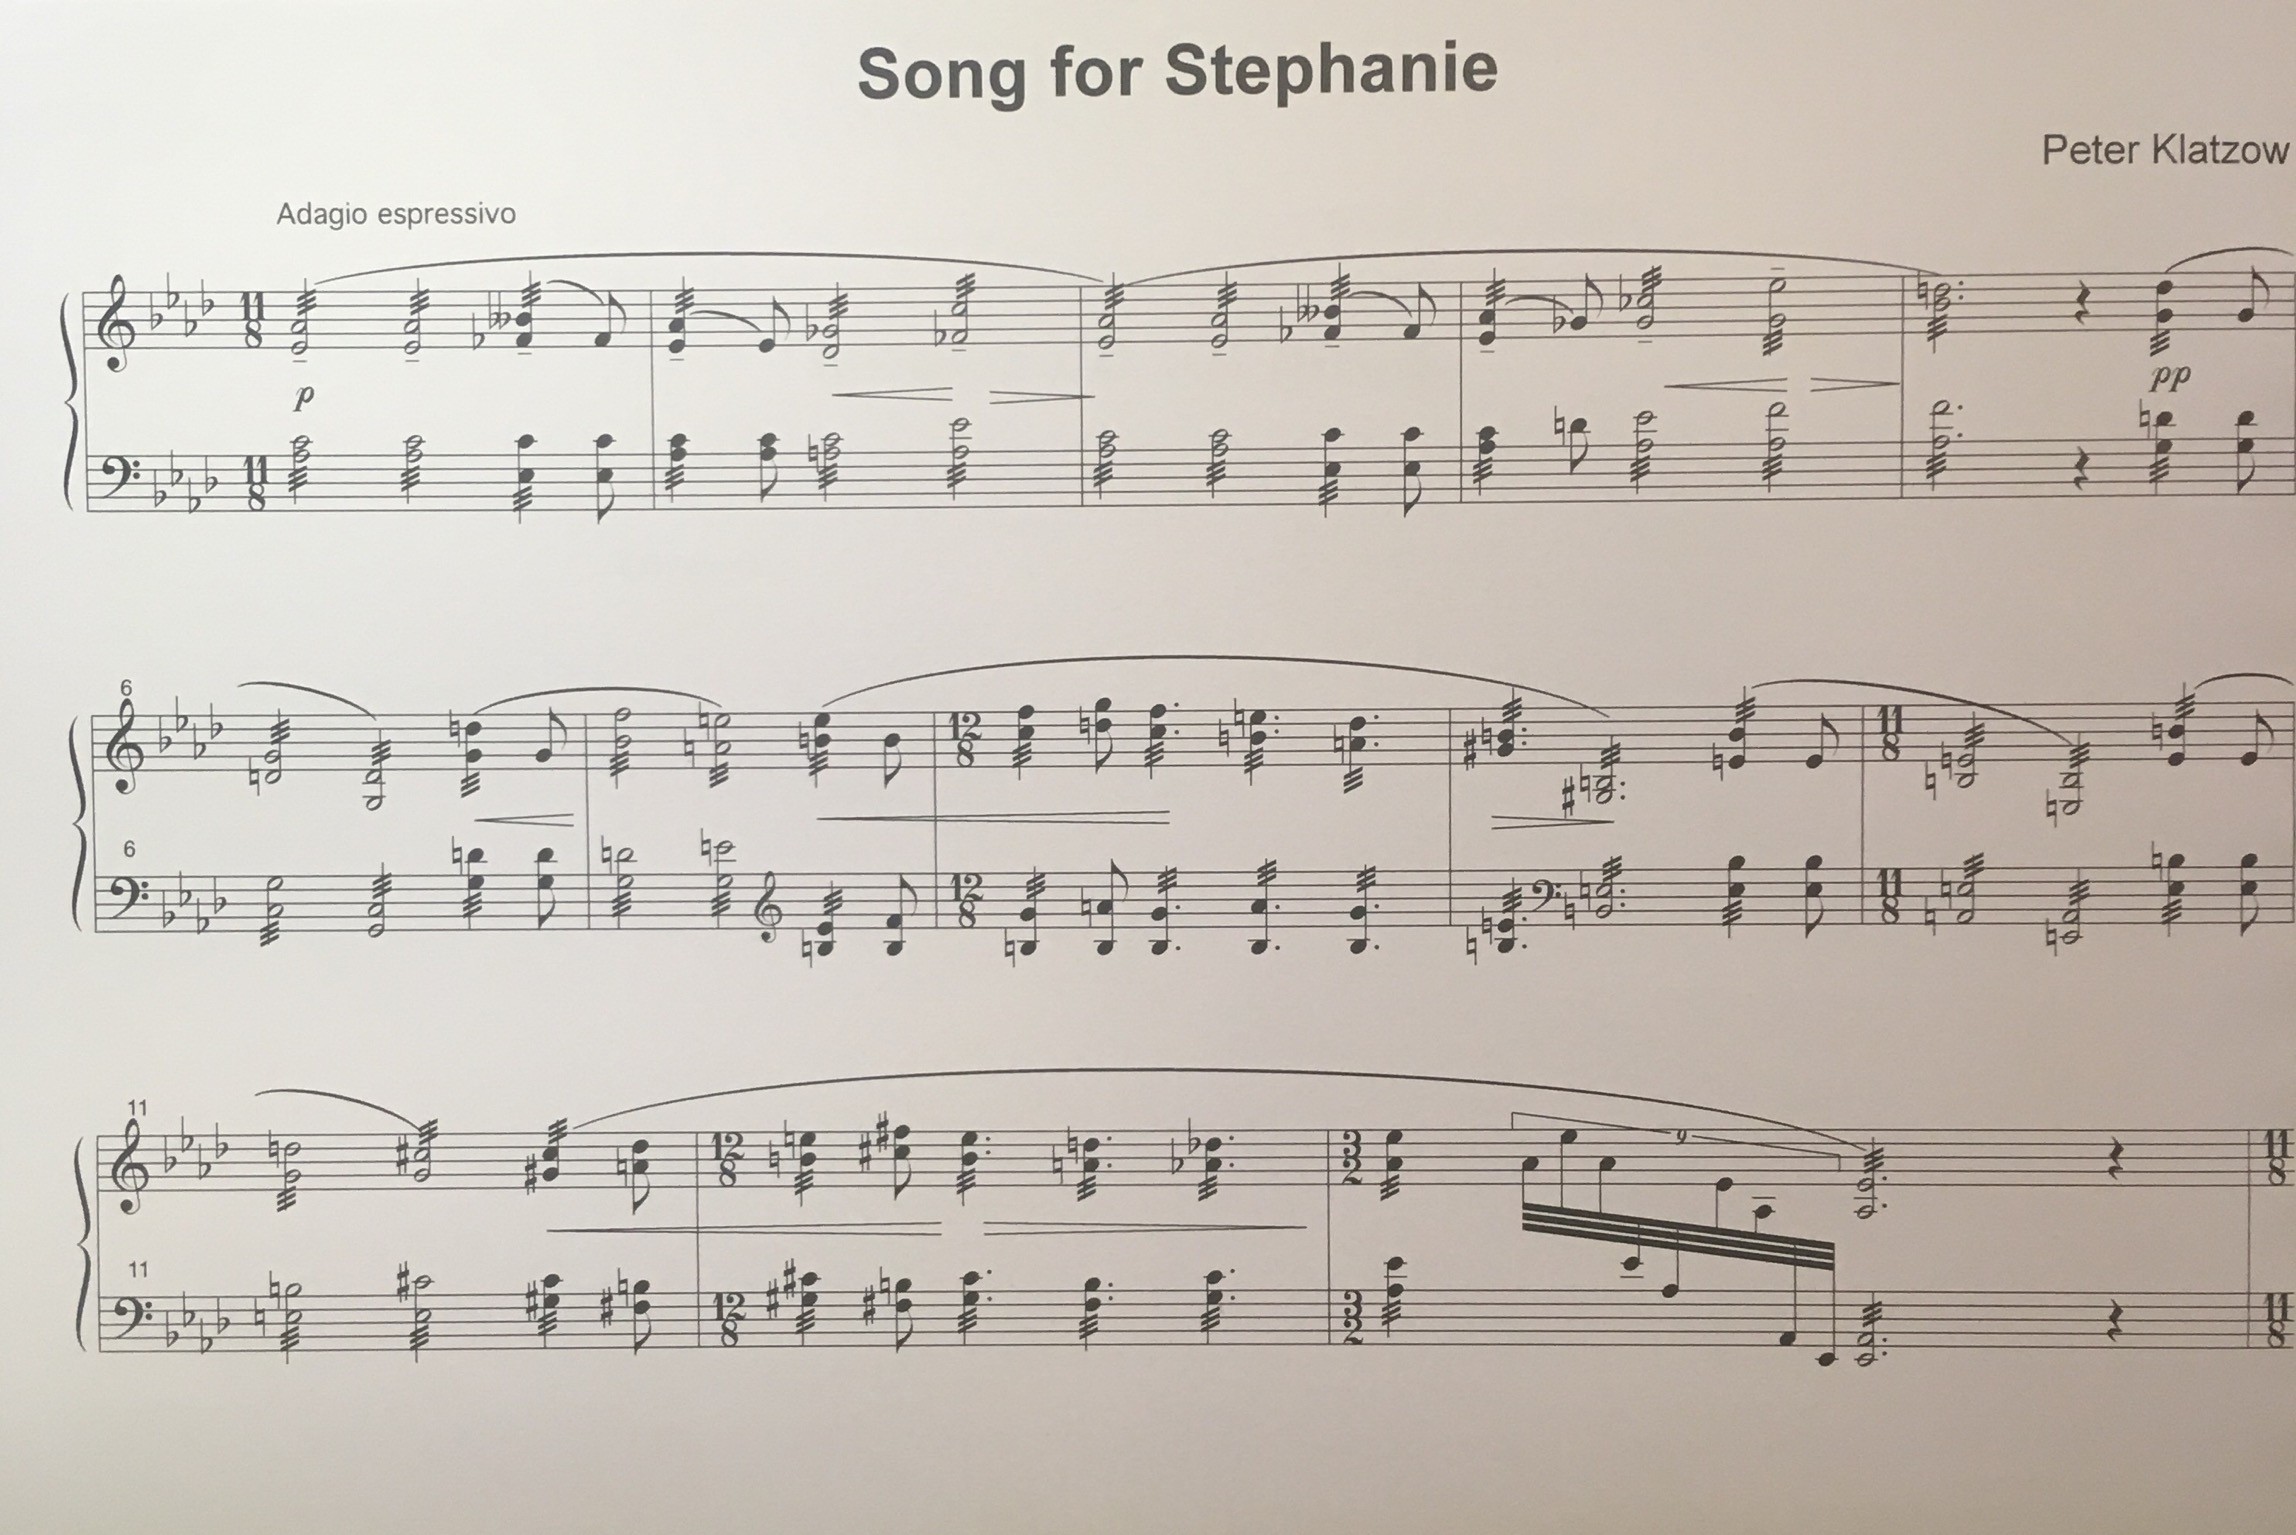 Song for Stephanie by Peter Klatzow